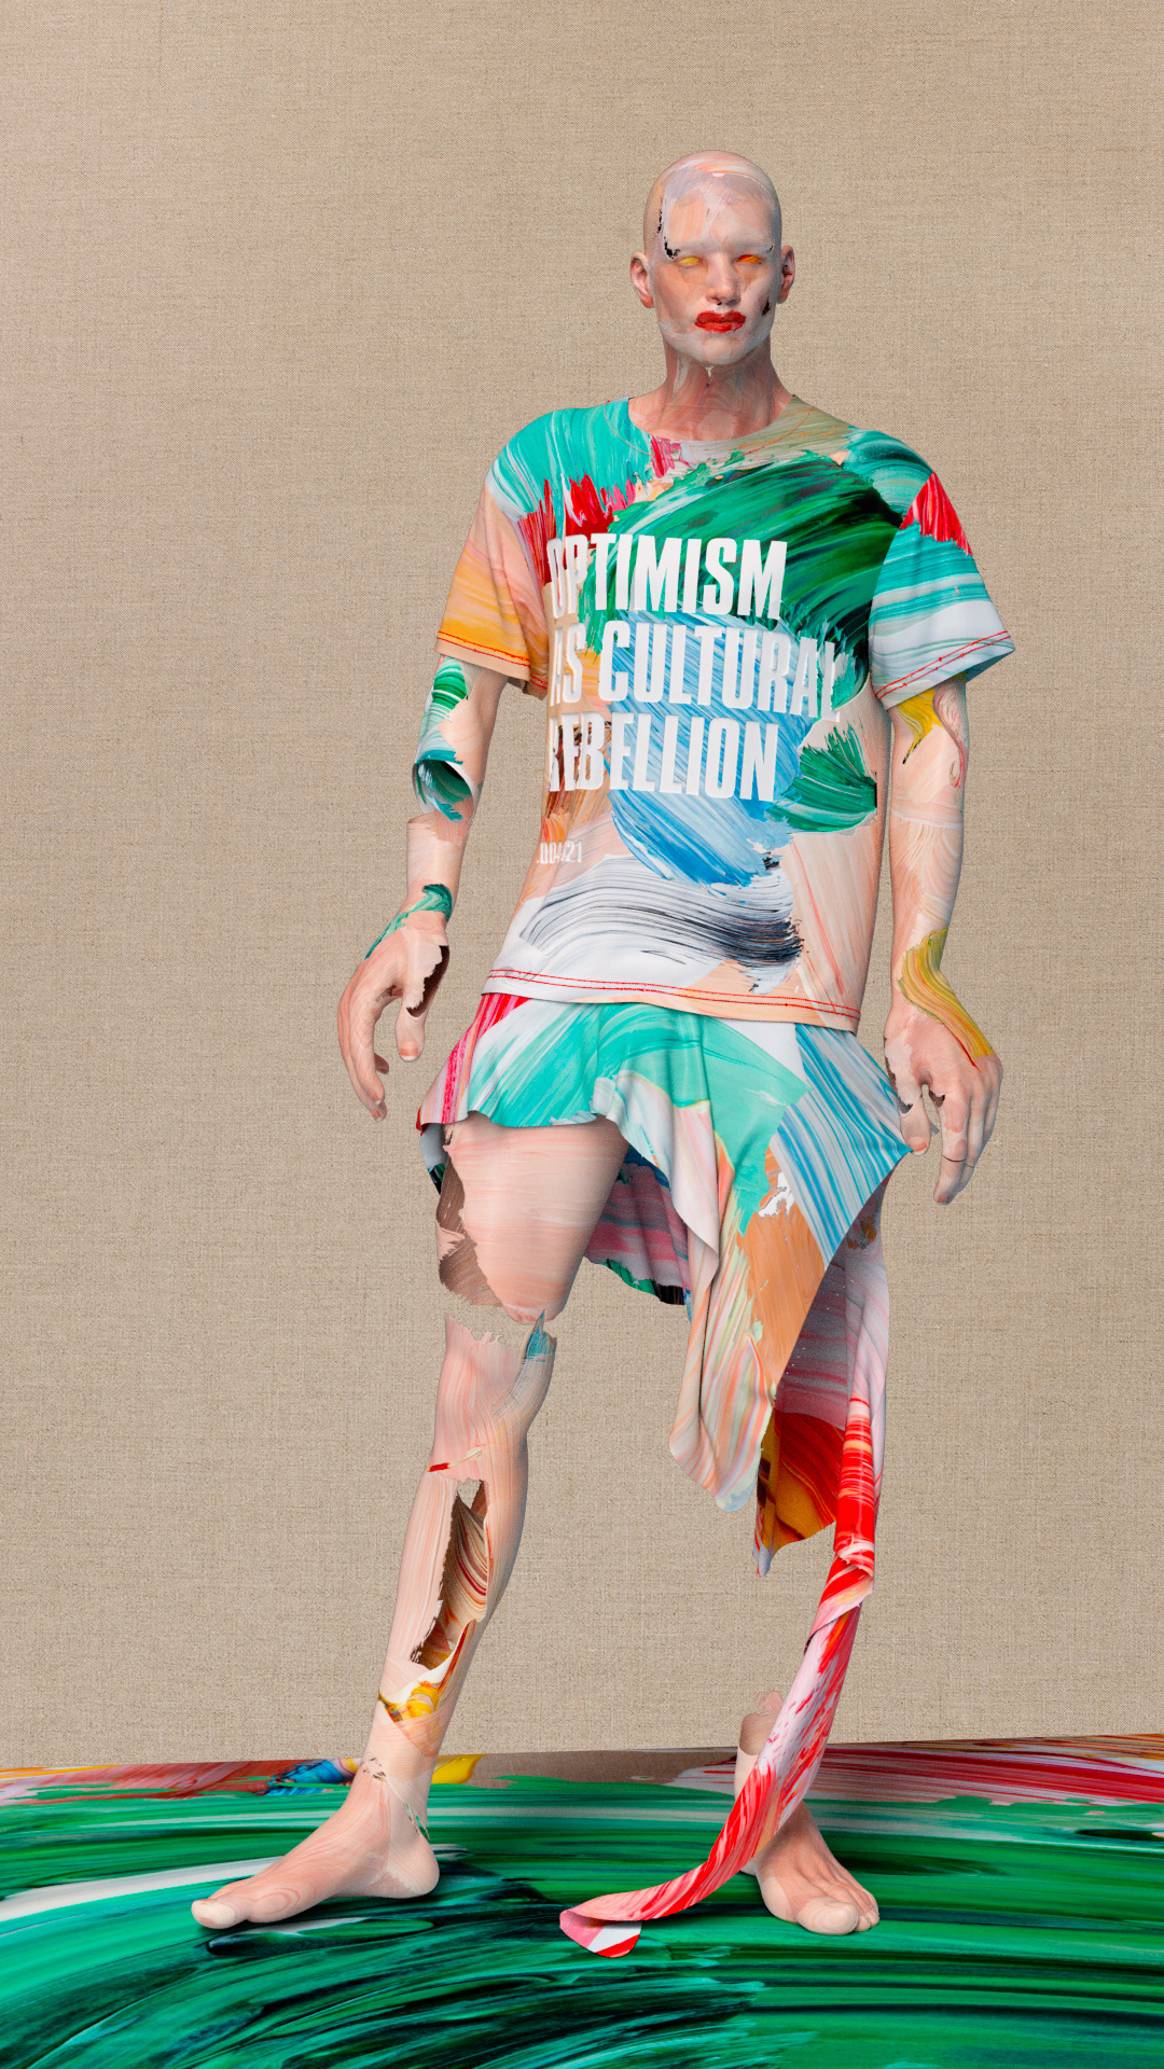 Image: Optimism as Cultural Rebellion 2004-2021 T-Shirt & Skirt by Matthew Stone